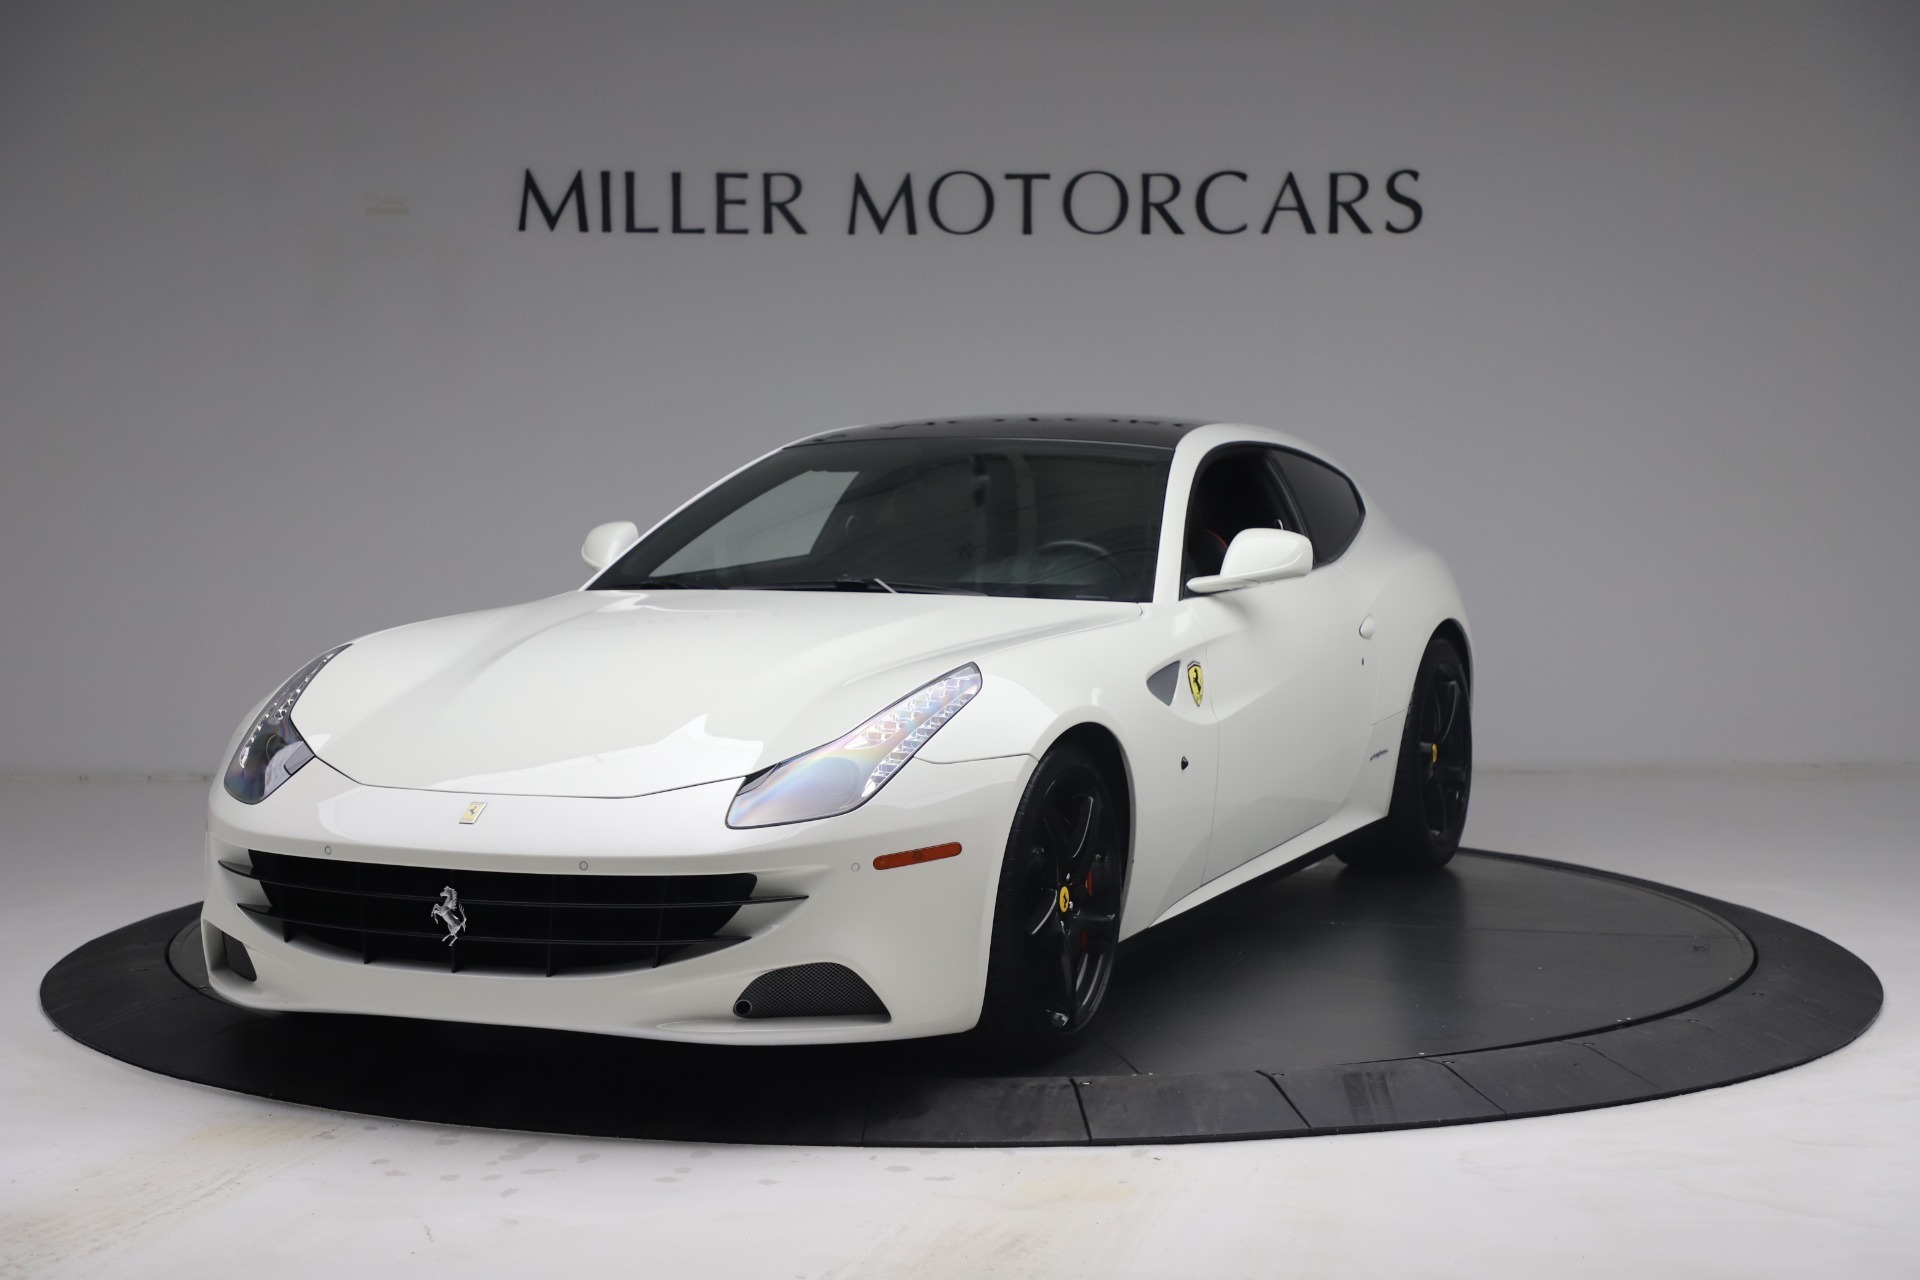 Used 2015 Ferrari FF for sale Sold at Rolls-Royce Motor Cars Greenwich in Greenwich CT 06830 1